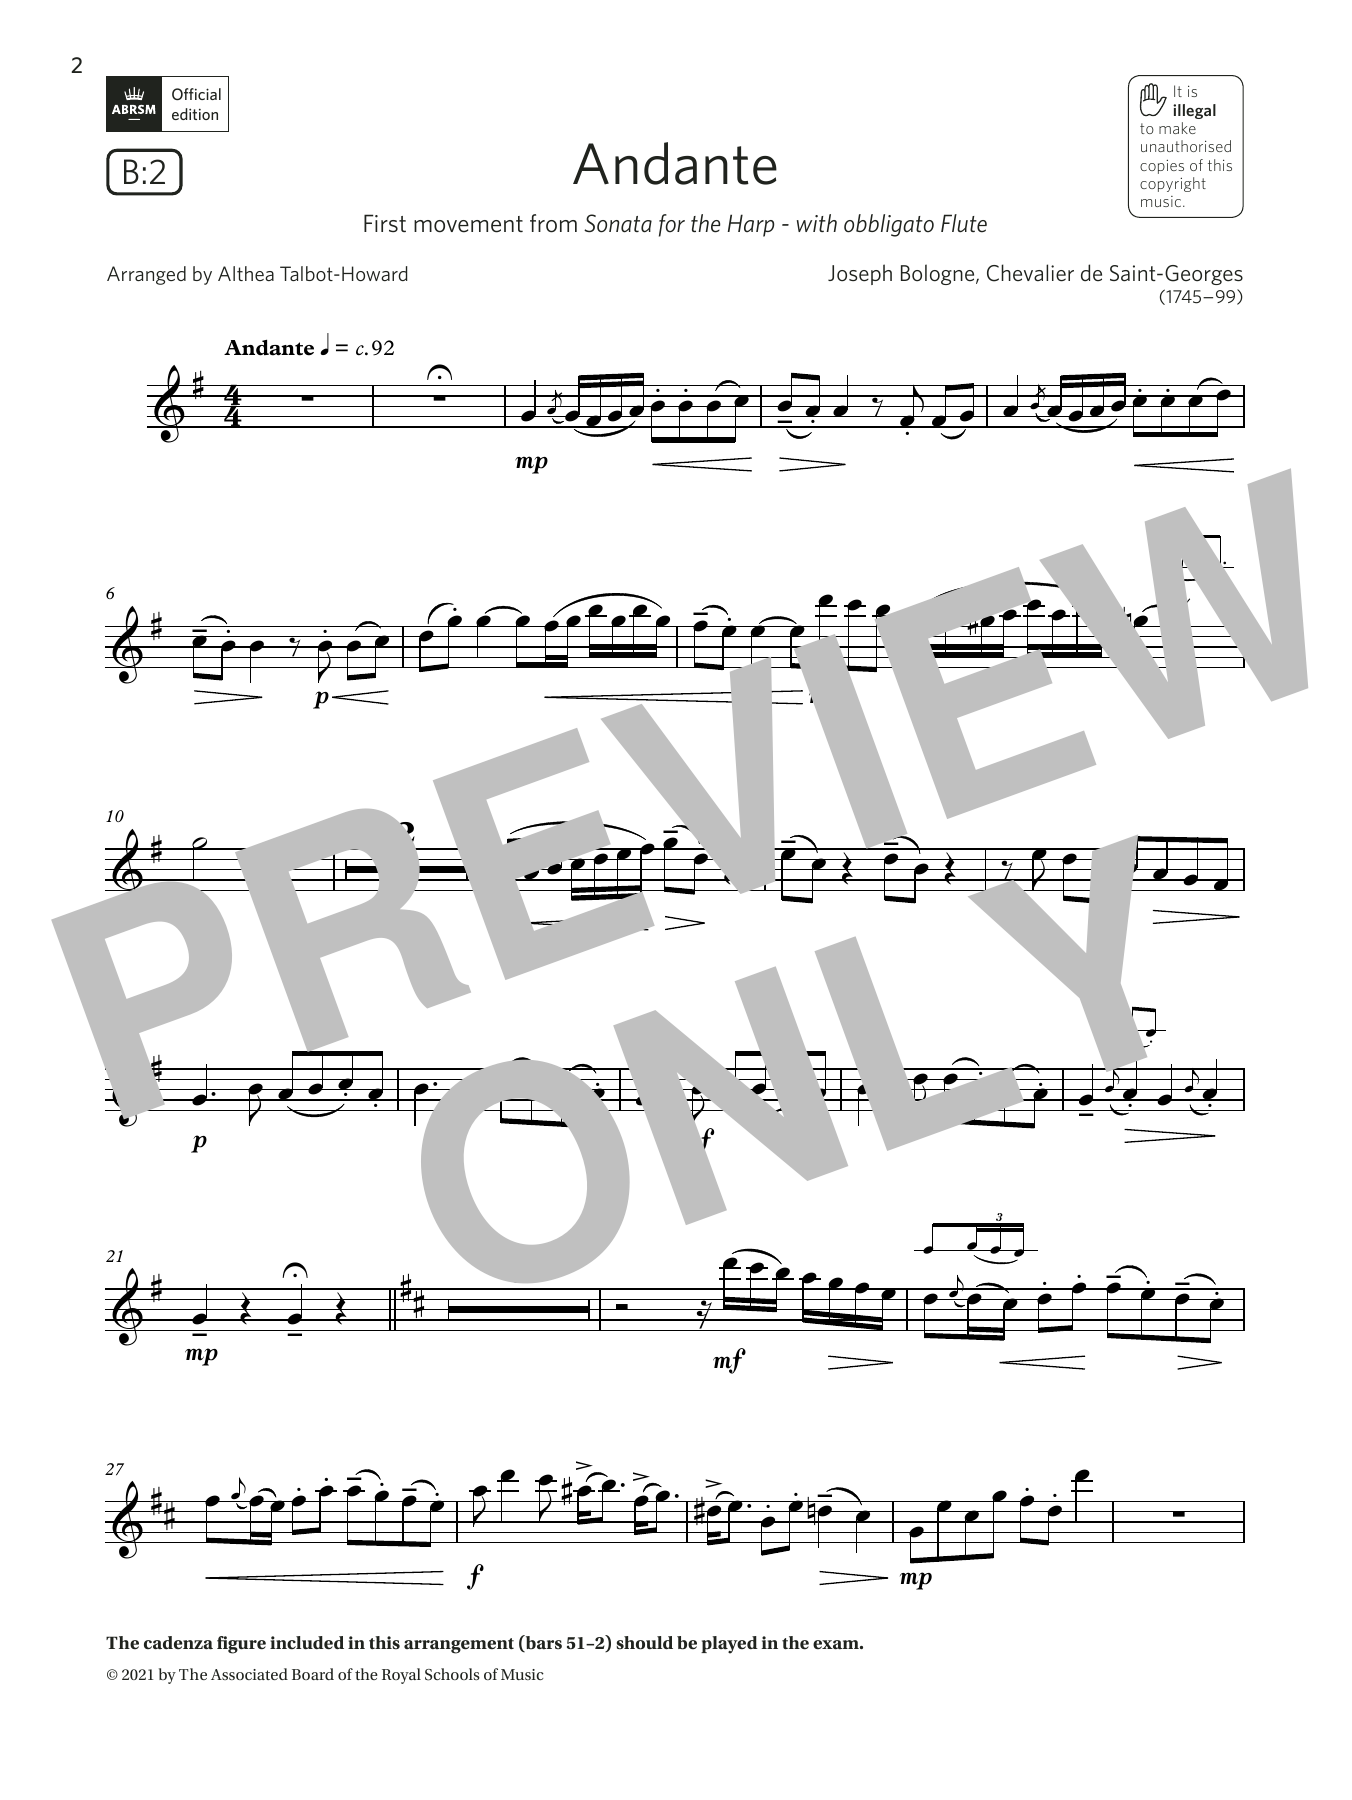 Download Althea Talbot-Howard Andante (from Sonata for the Harp) (Gra Sheet Music